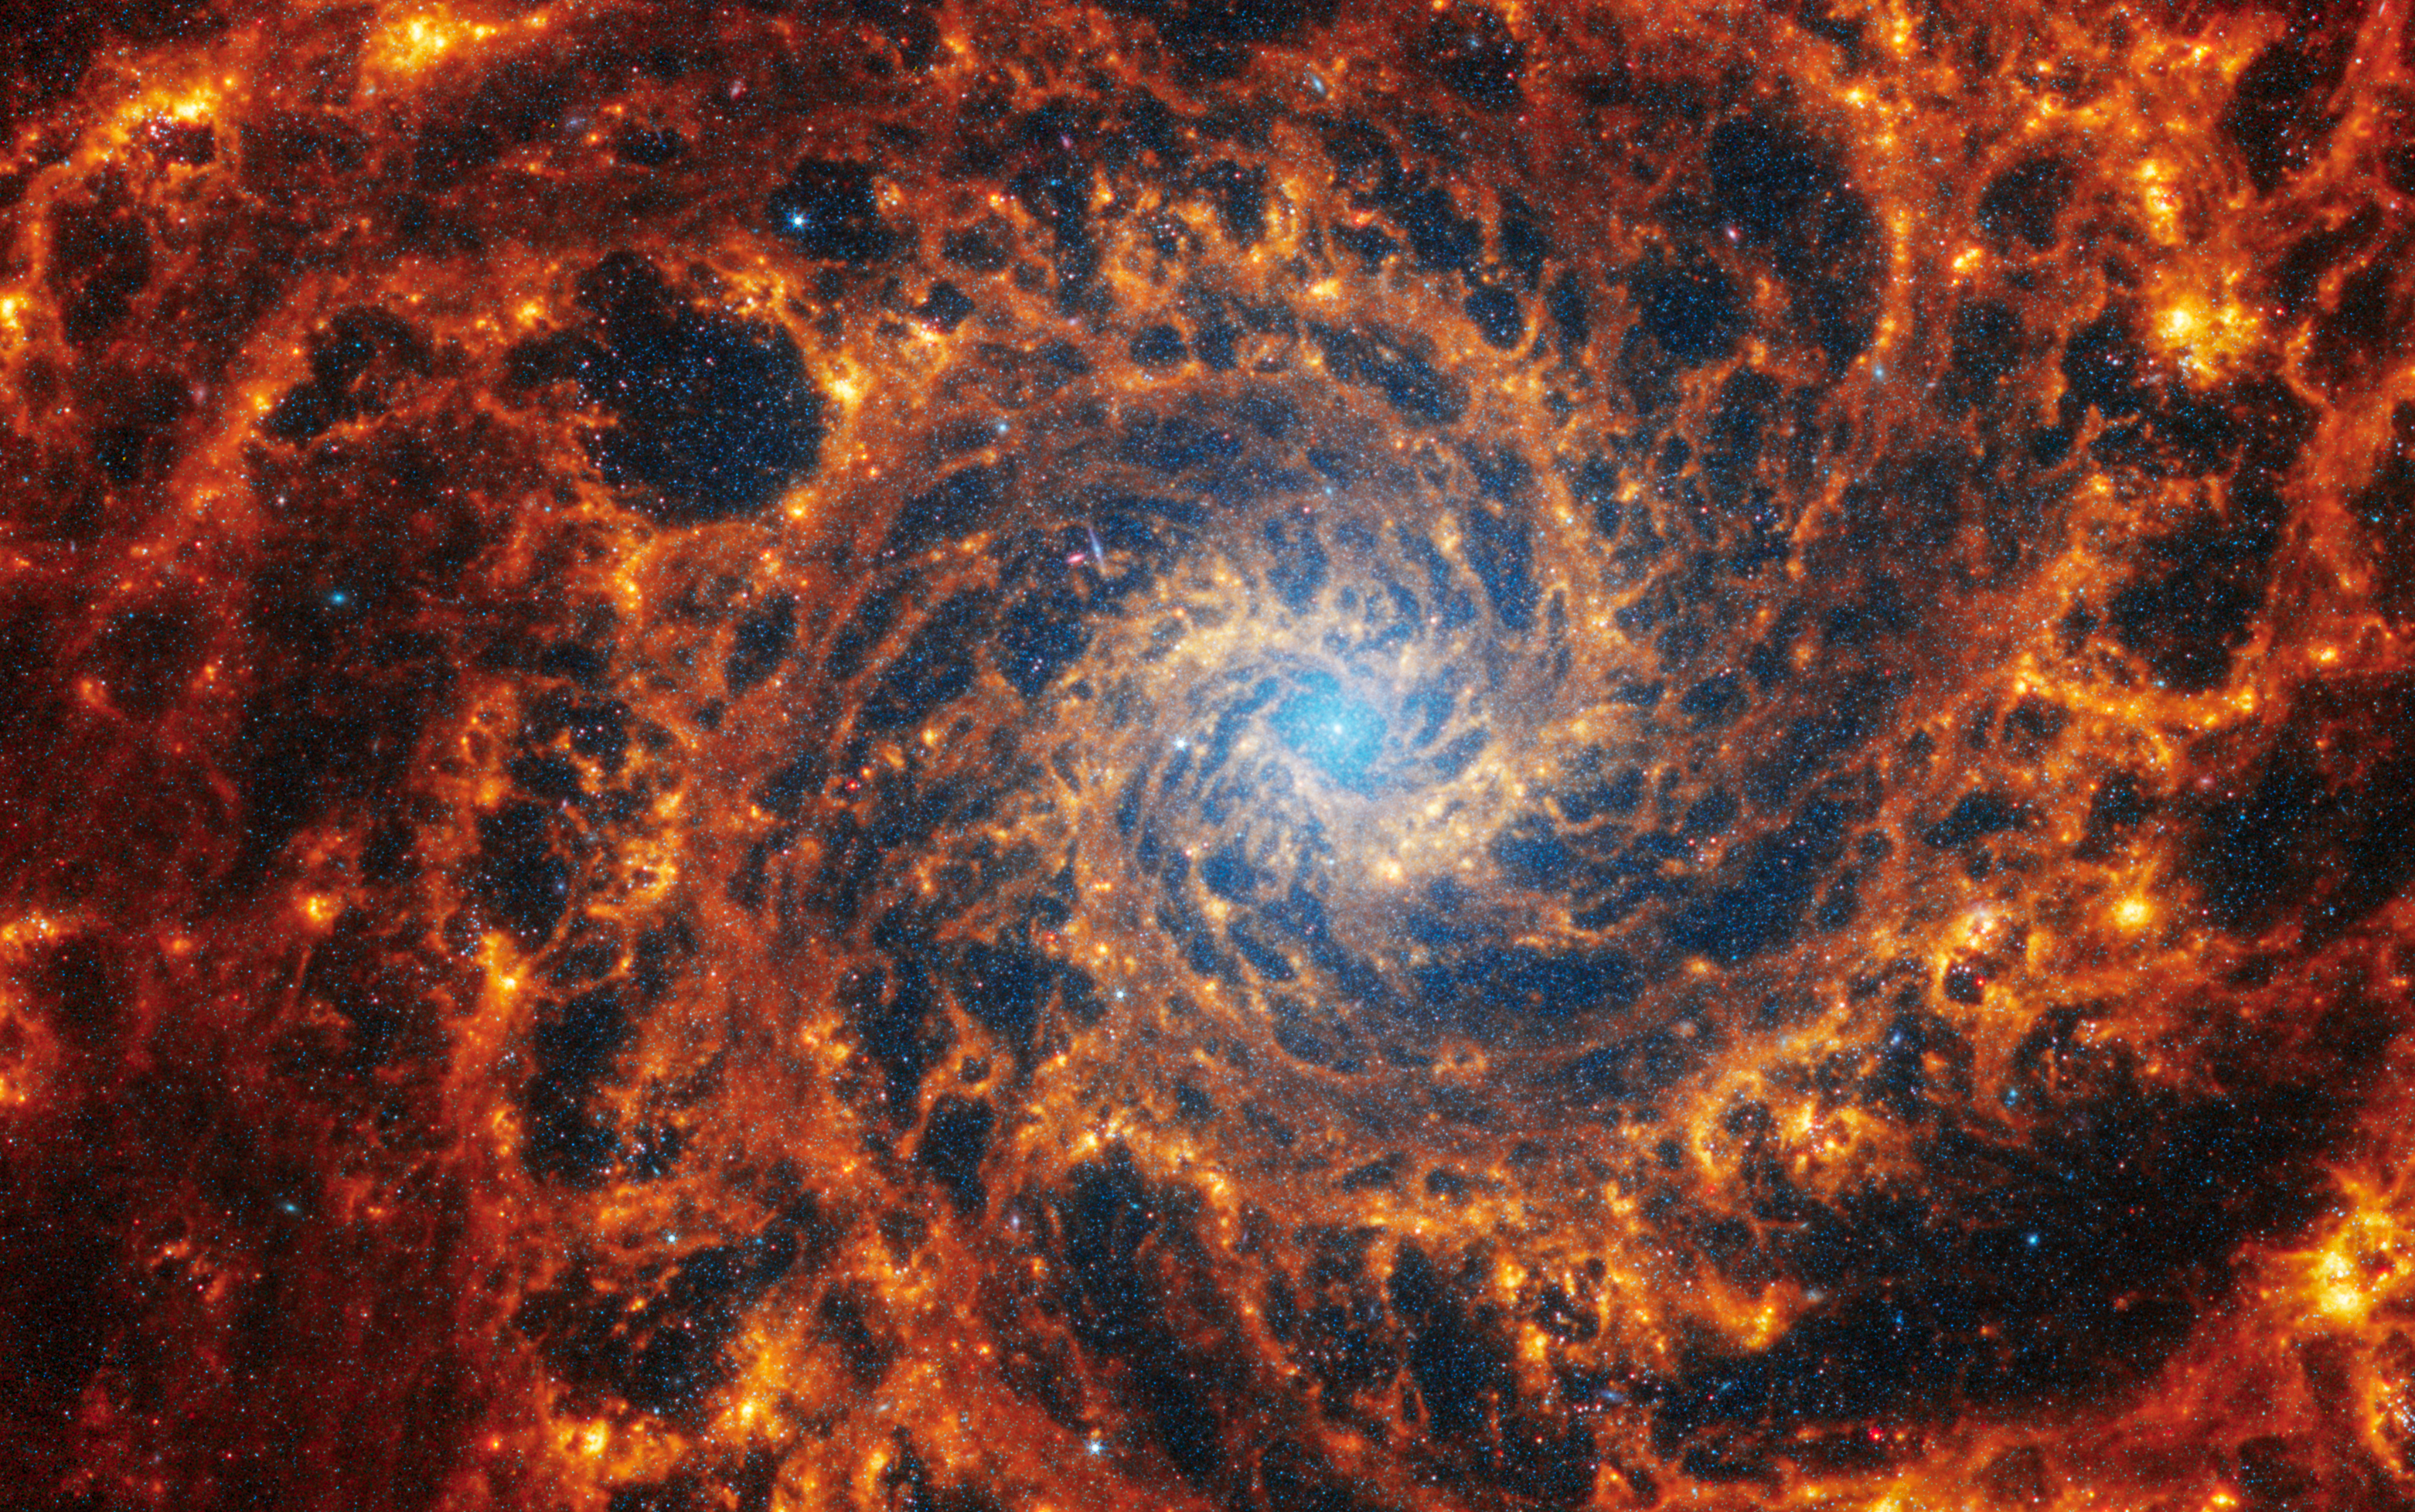 Webb’s image of NGC 628 shows a densely populated face-on spiral galaxy anchored by its central region, which has a light blue haze that takes up about a quarter of the view. In this circular core is the brightest blue area. Within the core are populations of older stars, represented by many pinpoints of blue light. Spiny spiral arms made of stars, gas, and dust also start at the center, largely starting in the wider area of the blue haze. The spiral arms extend to the edges, rotating counterclockwise. The spiraling filamentary structure looks somewhat like a cross section of a nautilus shell. The arms of the galaxy are largely orange, ranging from dark to bright orange. Scattered across the packed scene are some additional bright blue pinpoints of light, which are stars spread throughout the galaxy. In areas where there is less orange, it is darker, and some dark regions look more circular. A prominent dark “bubble” appears to the top left of the blue core. And a wider, elliptical “bubble” to the bottom right.